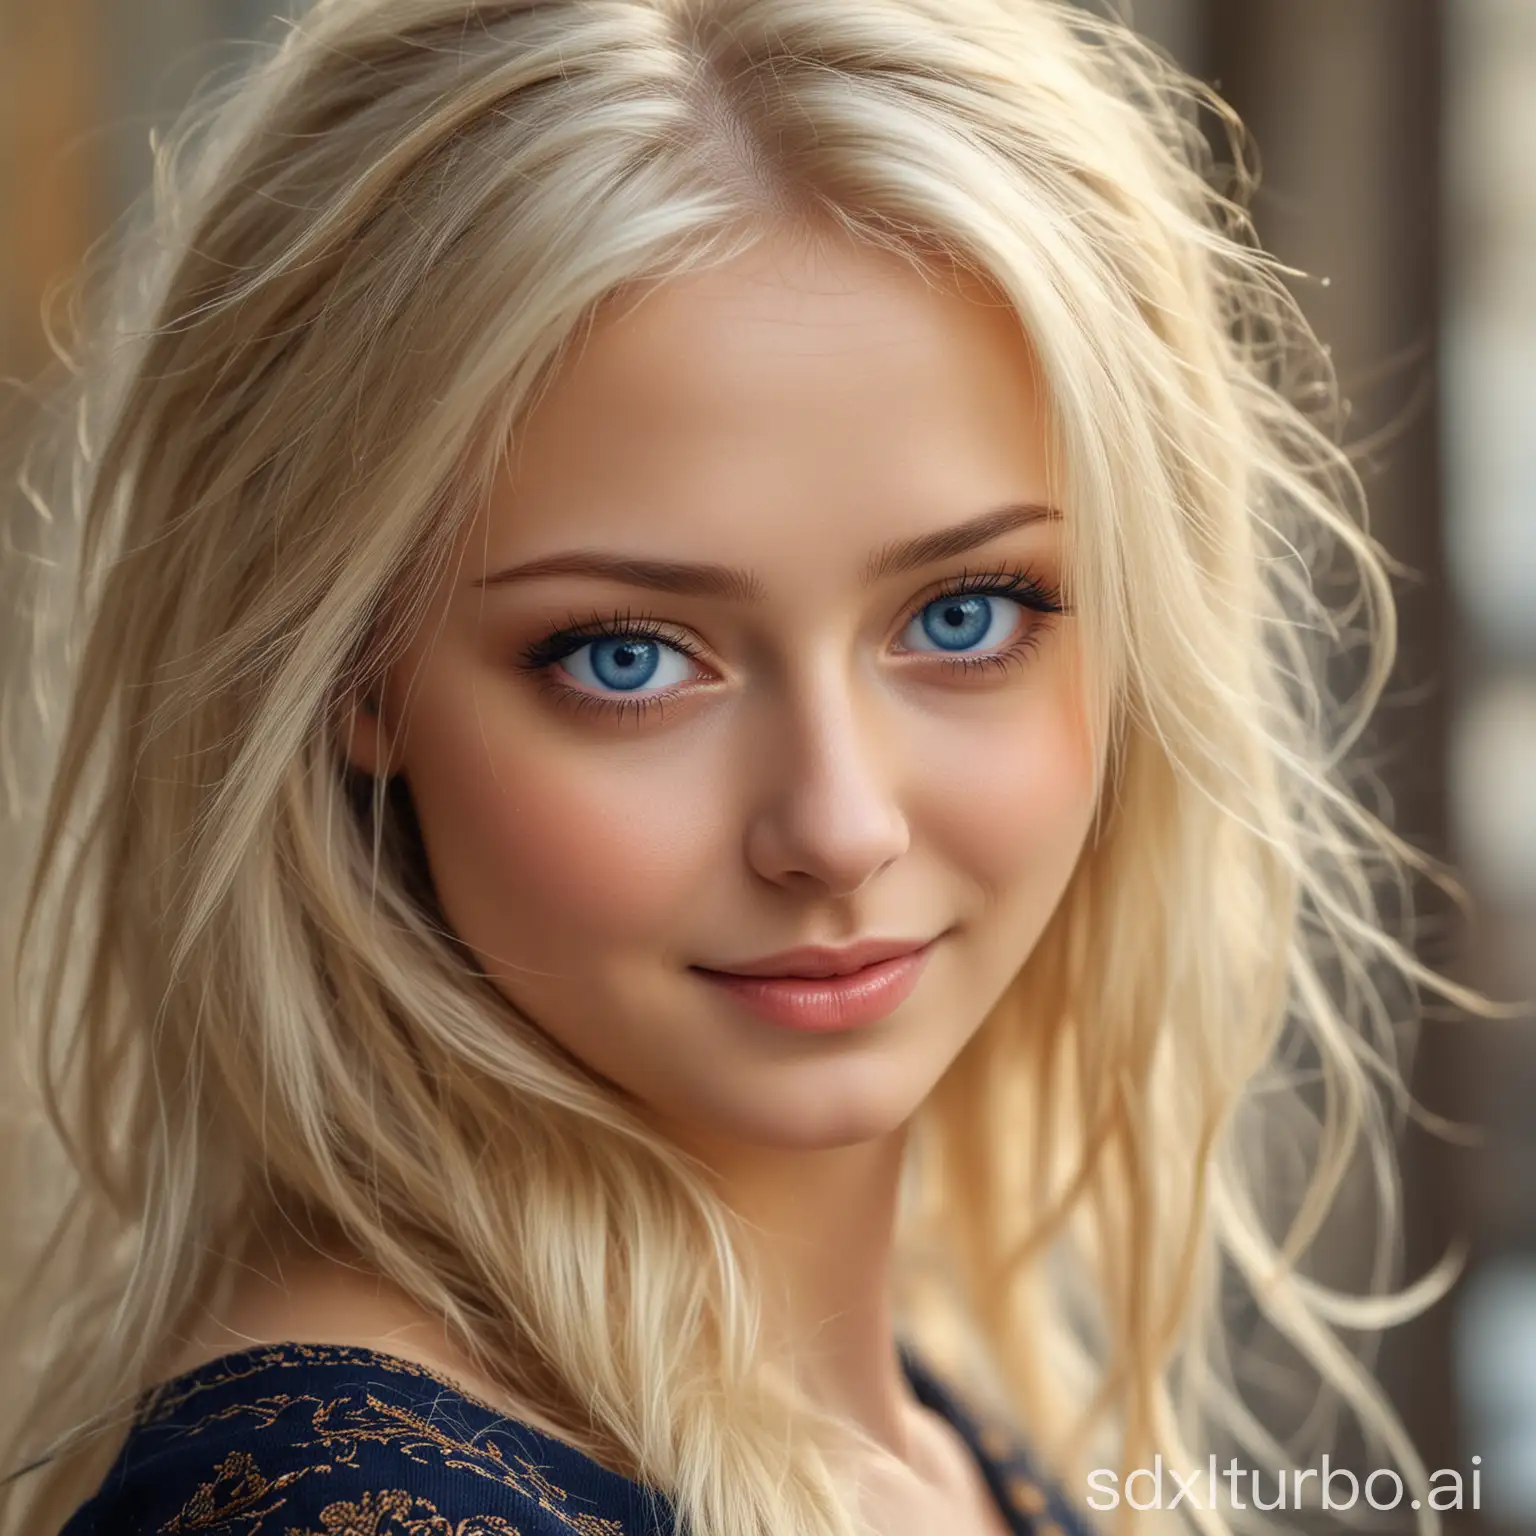 Russian beauty, tall, blonde, blue-eyed, refined, graceful, fair-skinned, with a nice figure, deep-eyed, unique temperament, mysterious, charming smile, blue-eyed, high nose bridge, high definition